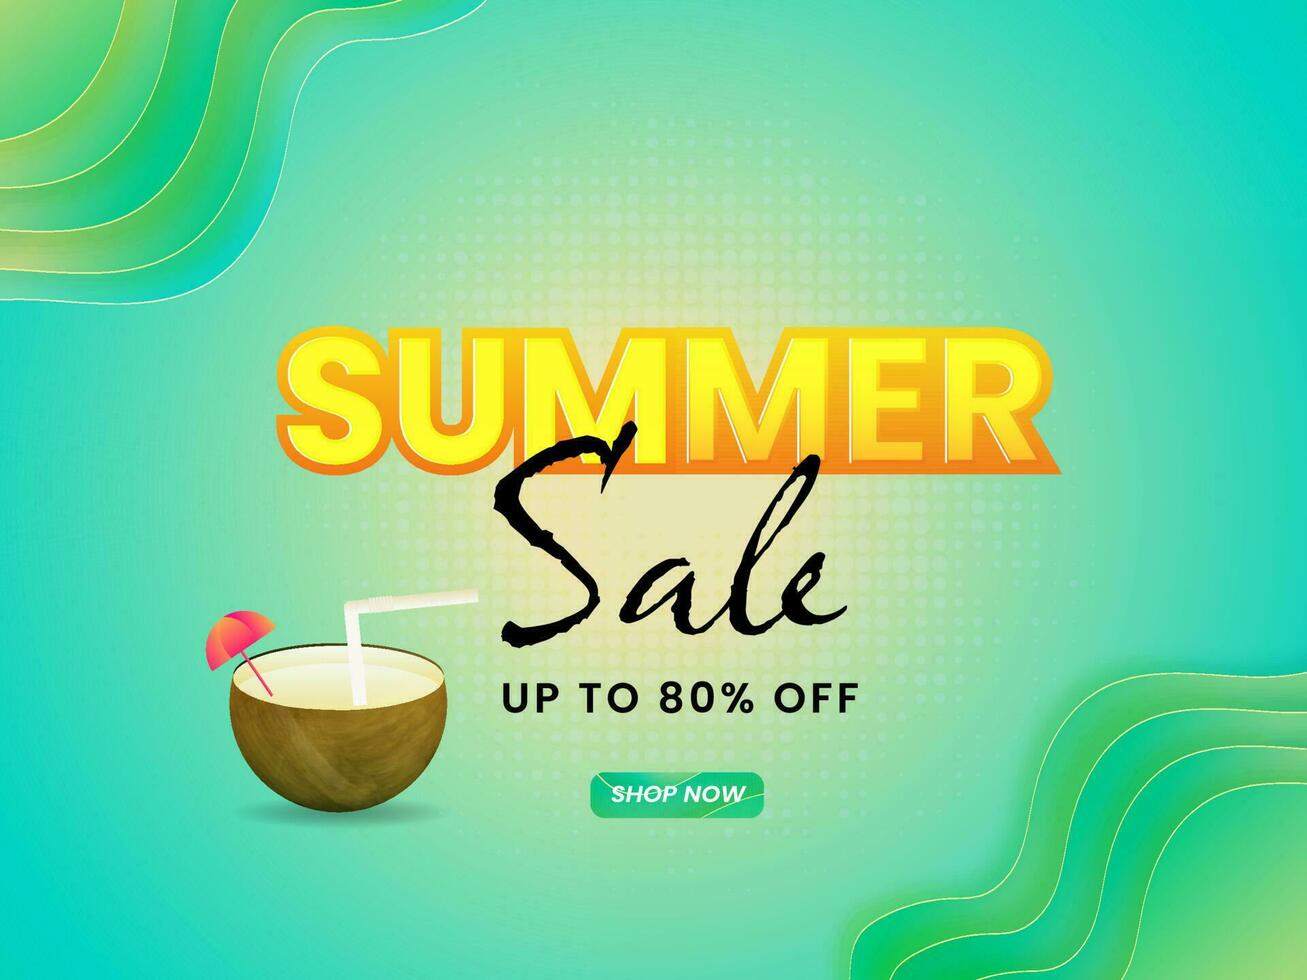 Summer Sale Poster Or Banner Design With Discount Offer And Coconut Drink On Green Gradient Background. vector